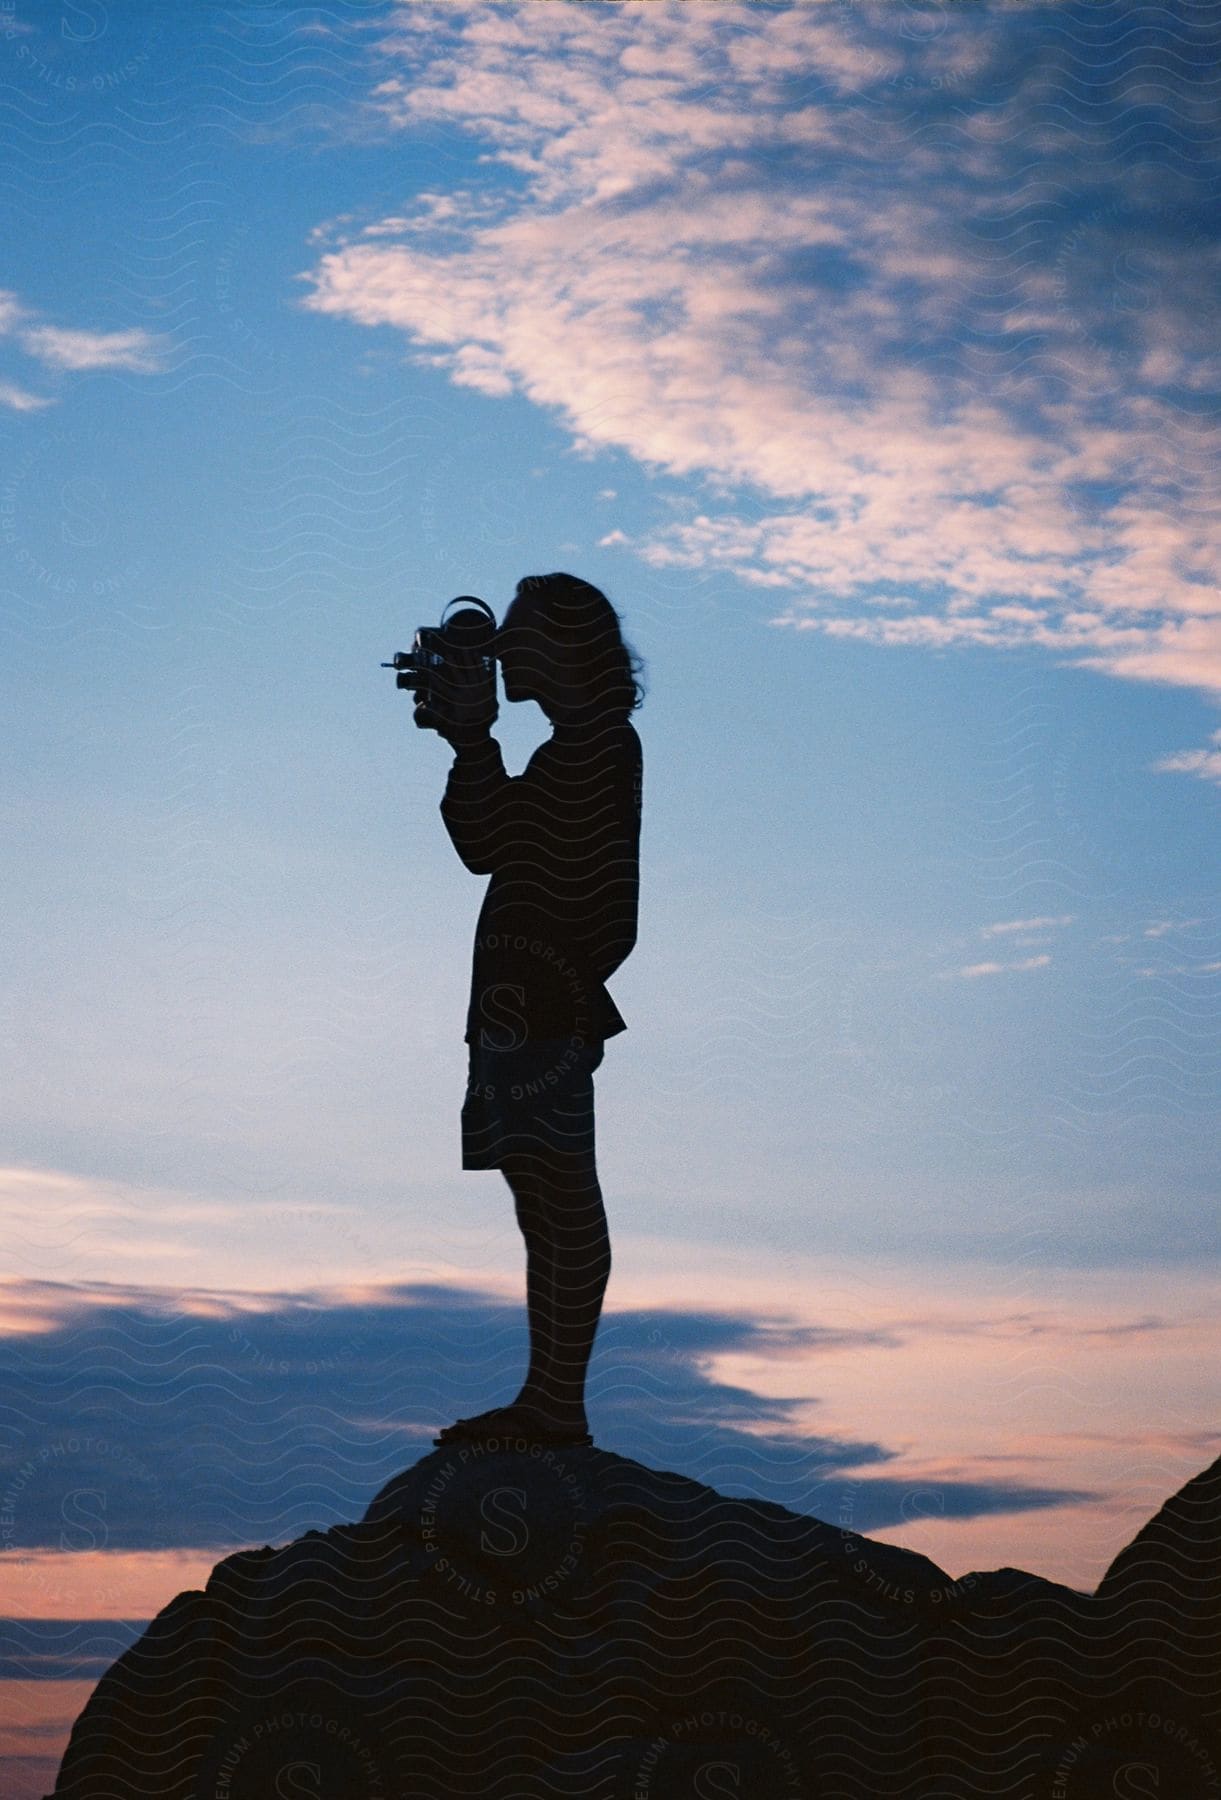 A person standing on a rock holding a camera and taking a photo